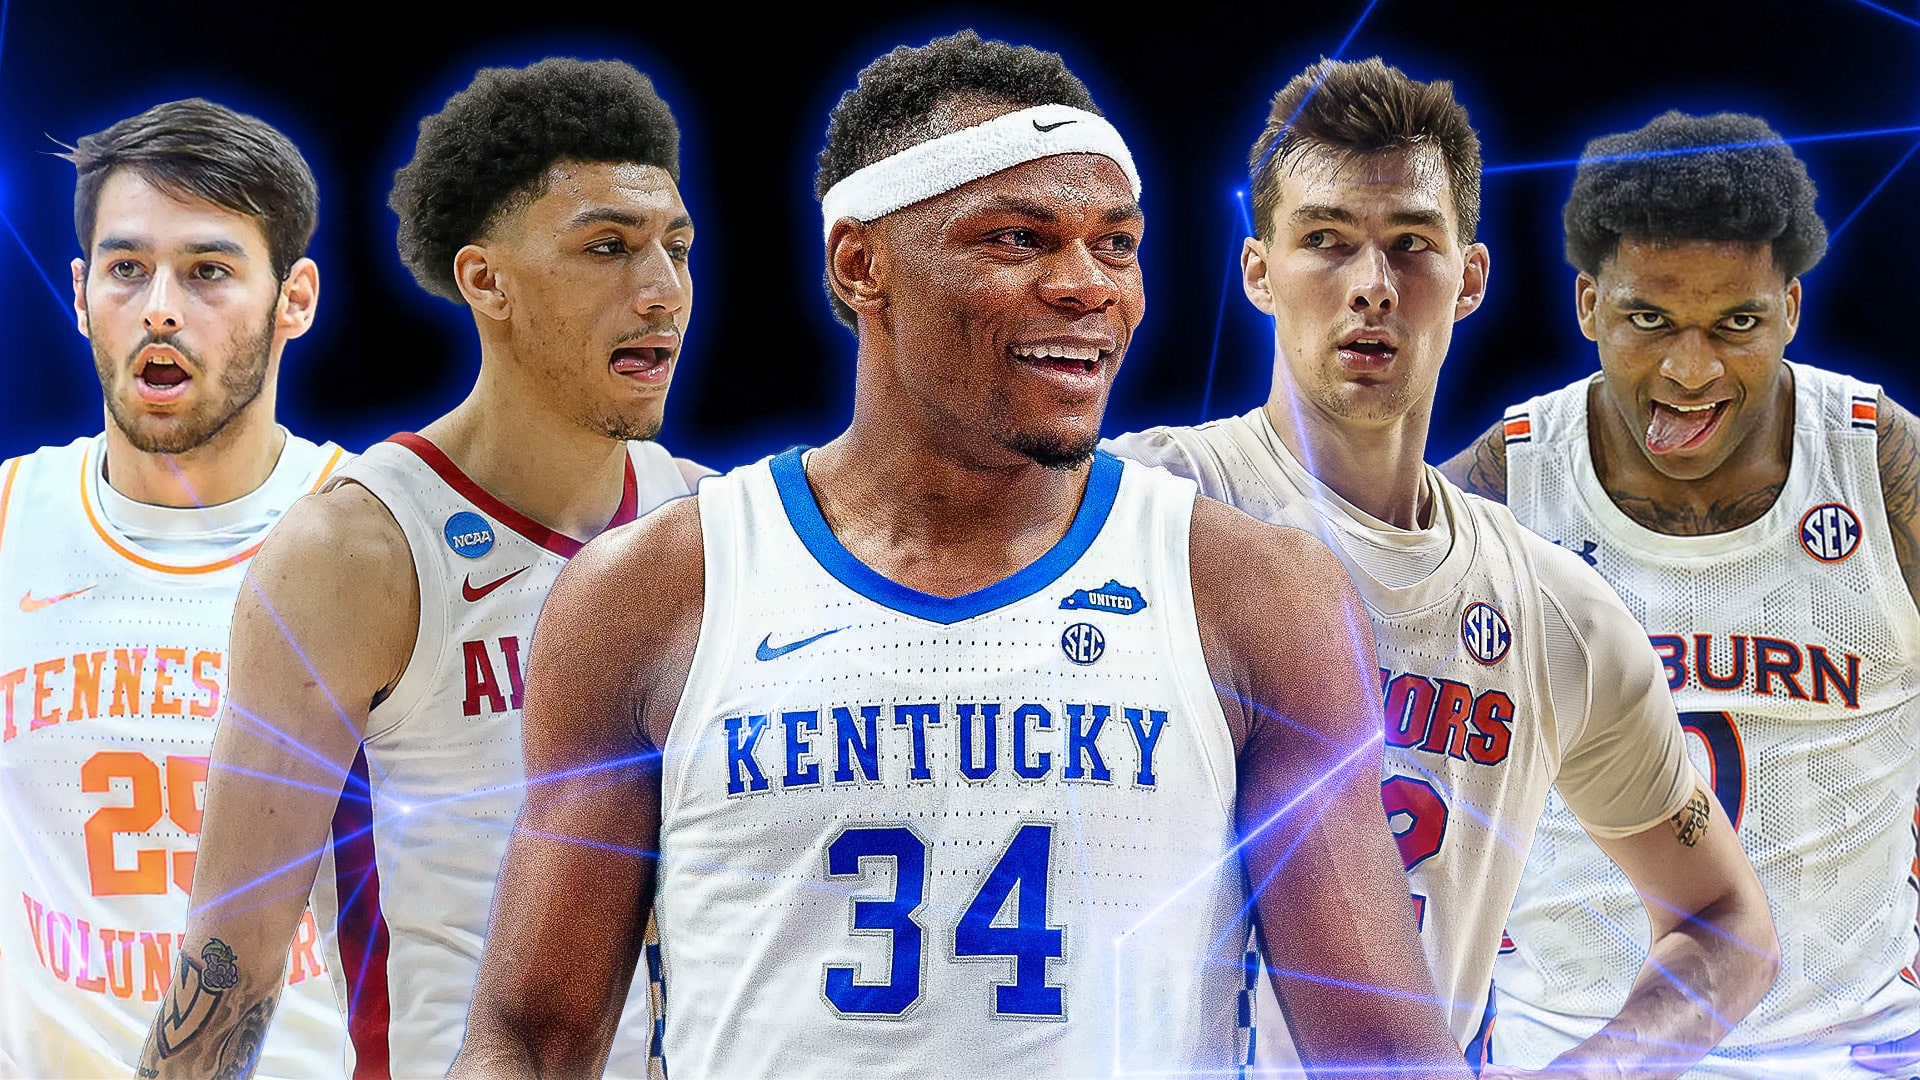 Looking at the power rankings for the 2021-22 NCAA college